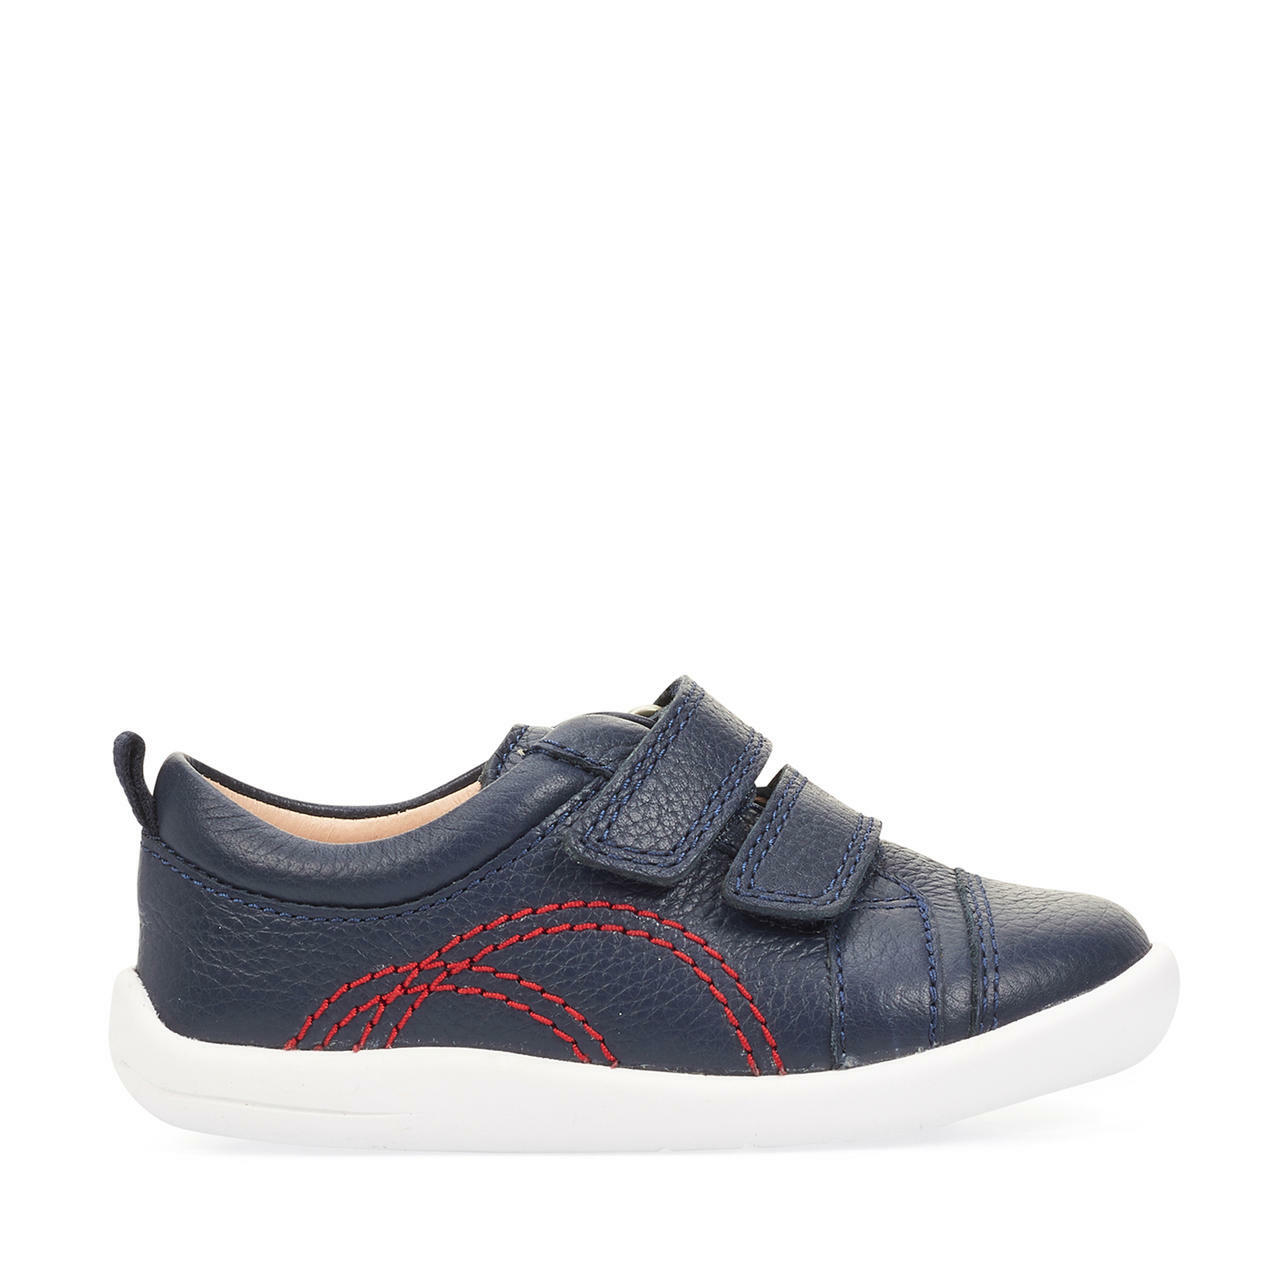 StartRite Tree House 0781_9 Boys Navy Leather Touch Fastening First Shoes